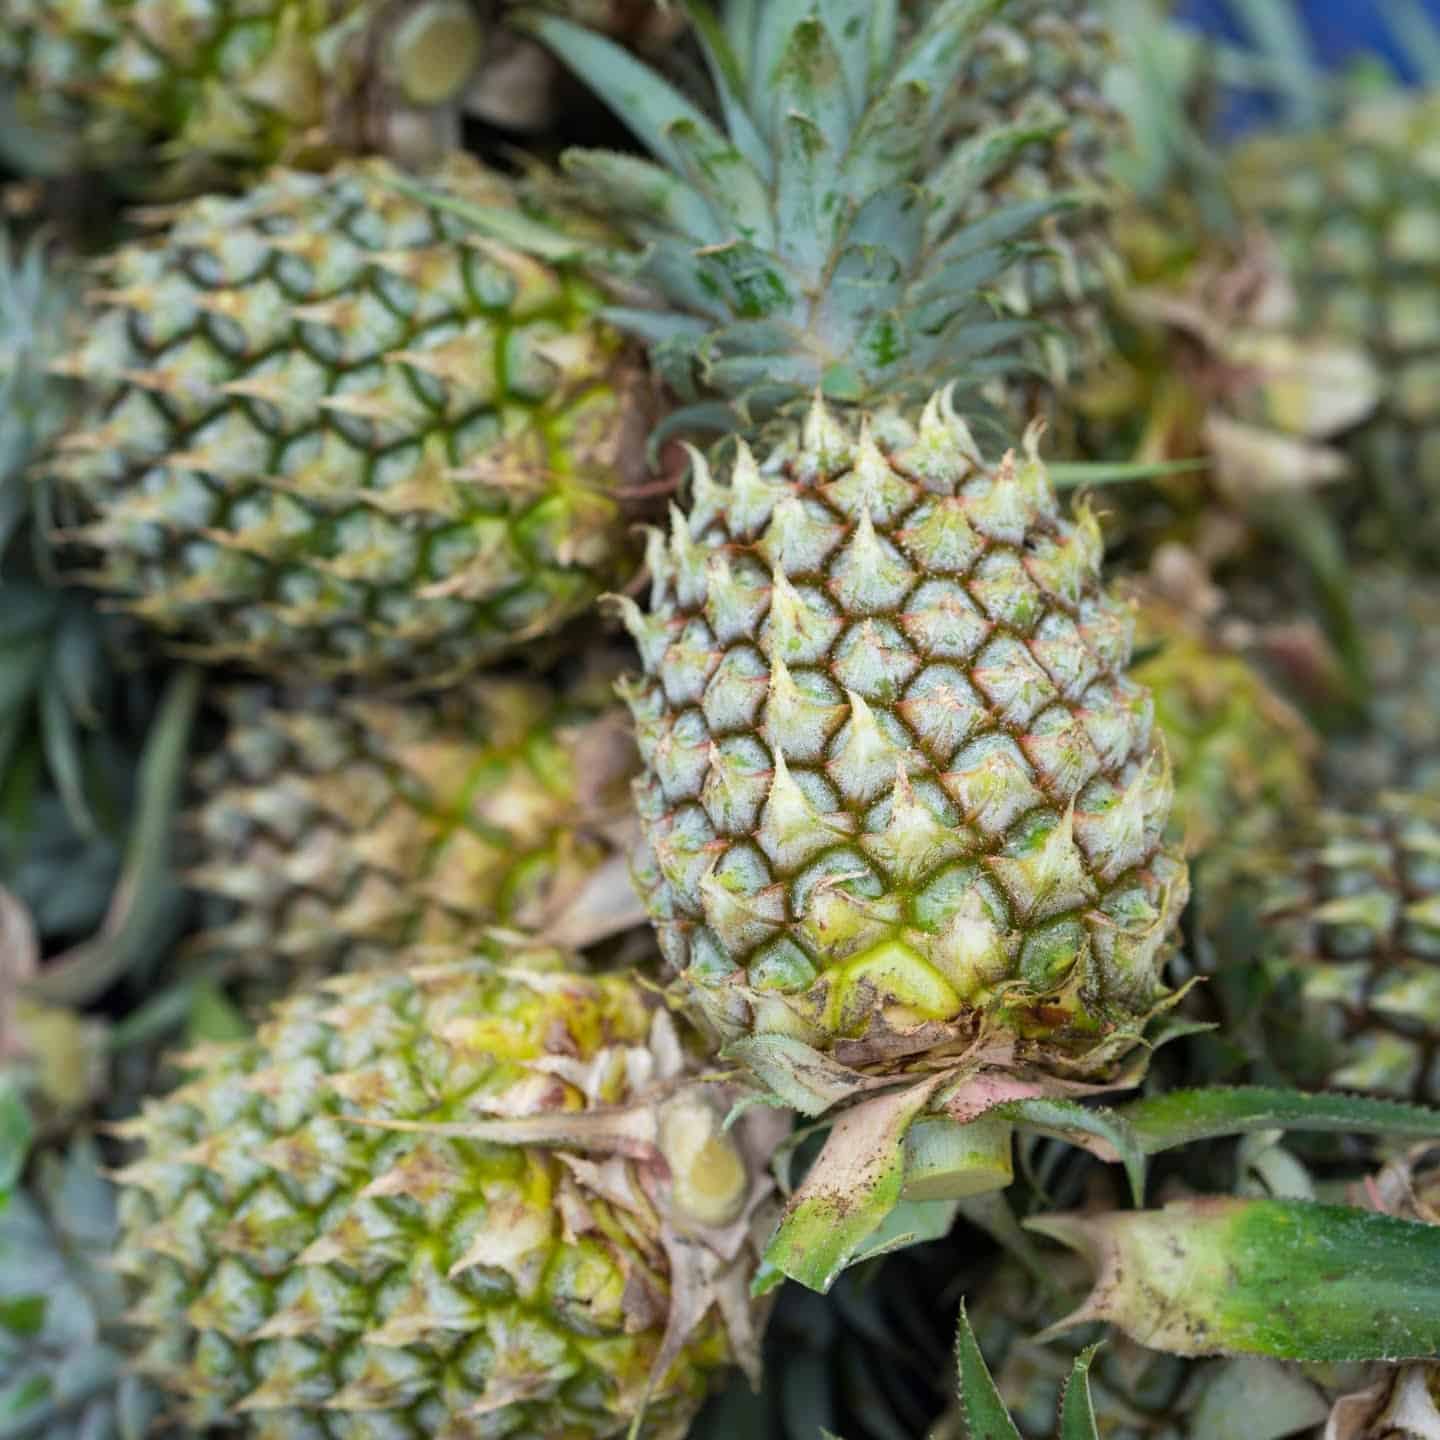 Example of an unripe pineapple